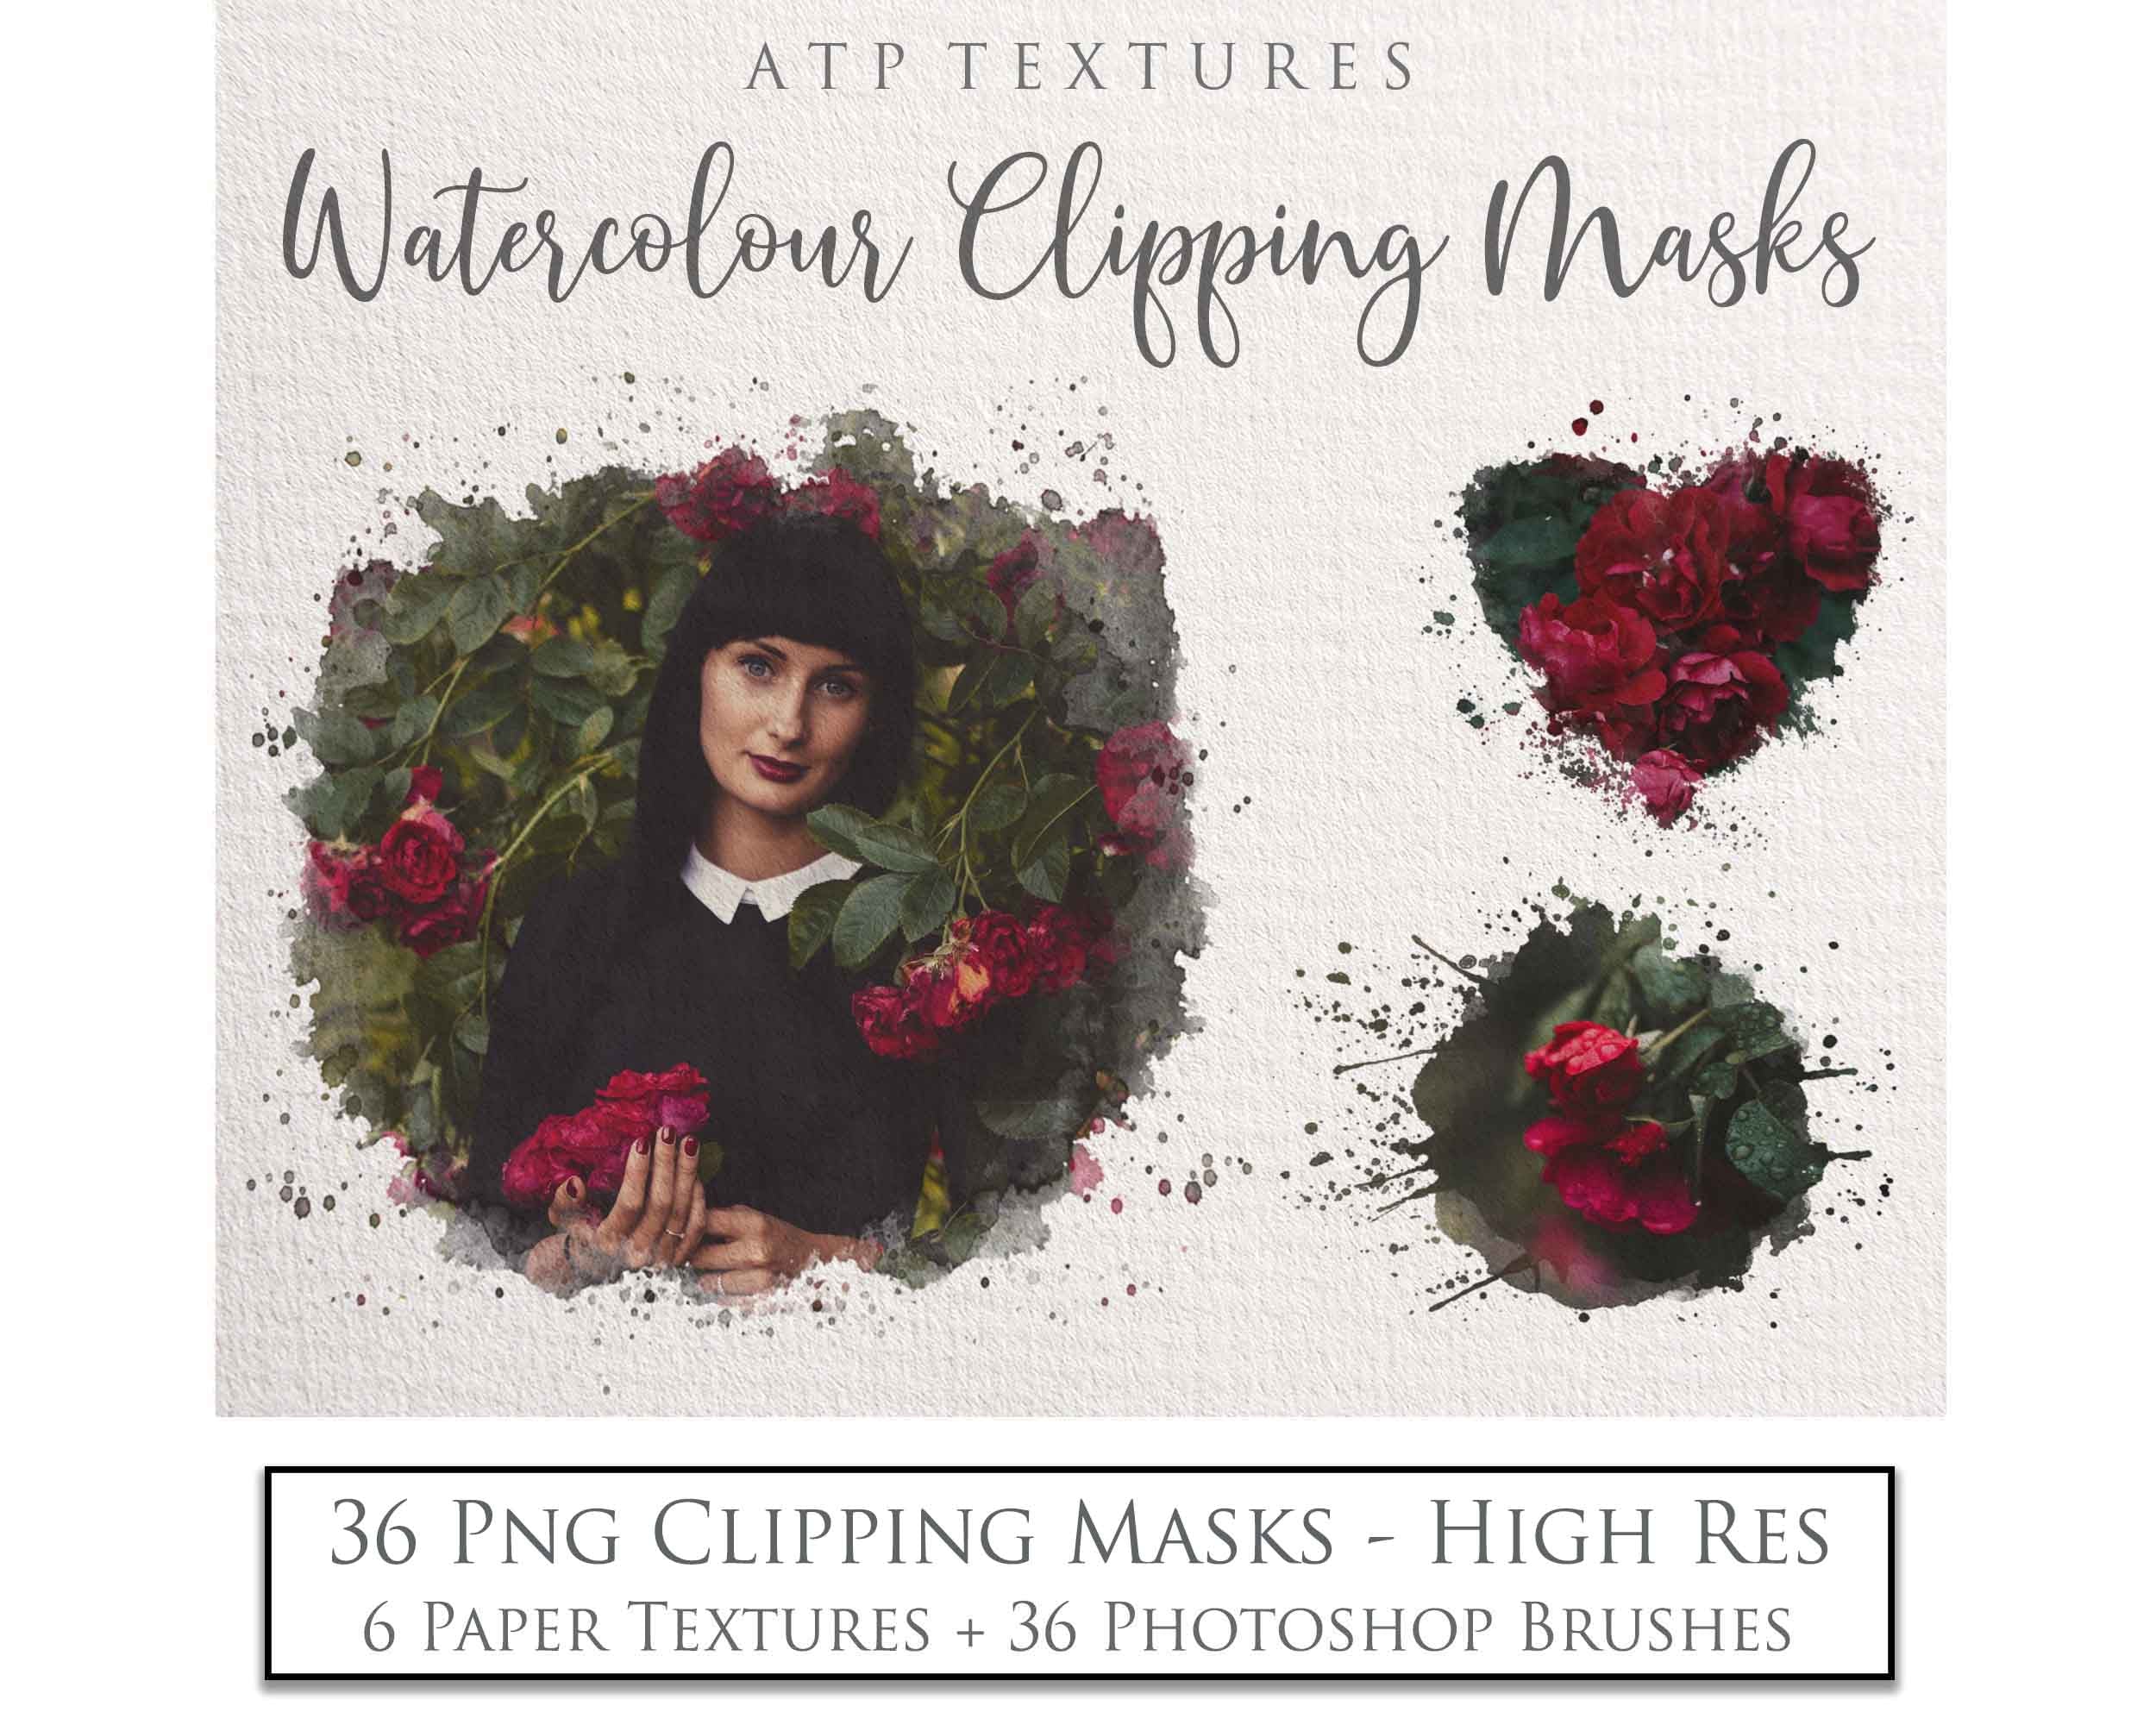 Watercolour clipping masks. High resolution Png, transparent background, files. 36 Photoshop brushes are included in the set. All different and unique! Photoshop brushes with overlays for photography and digital design. Digital Stamps for scrapbooking, photo edits. Realistic fine art assets and Add ons. ATP Textures